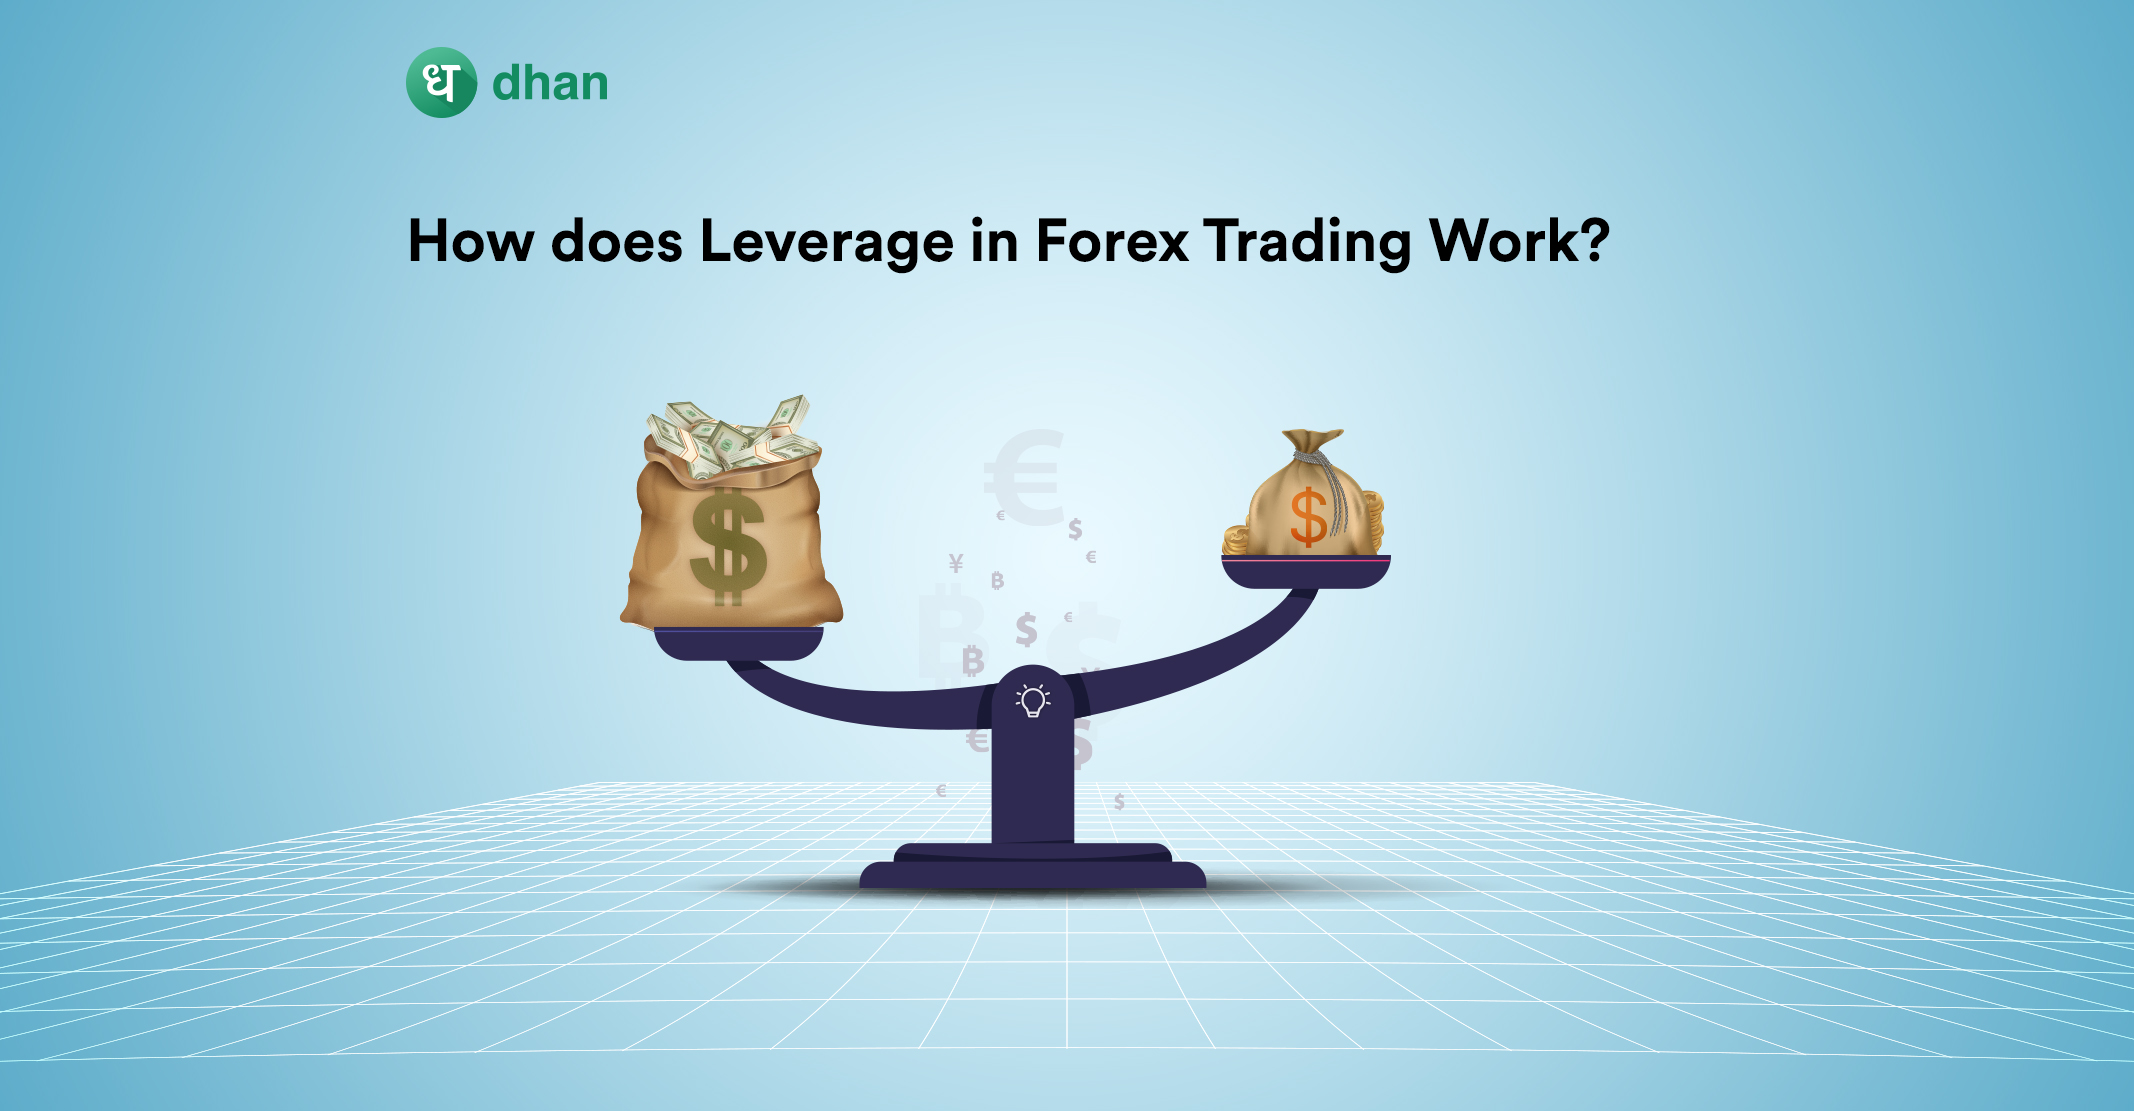 Leverage in Forex Trading